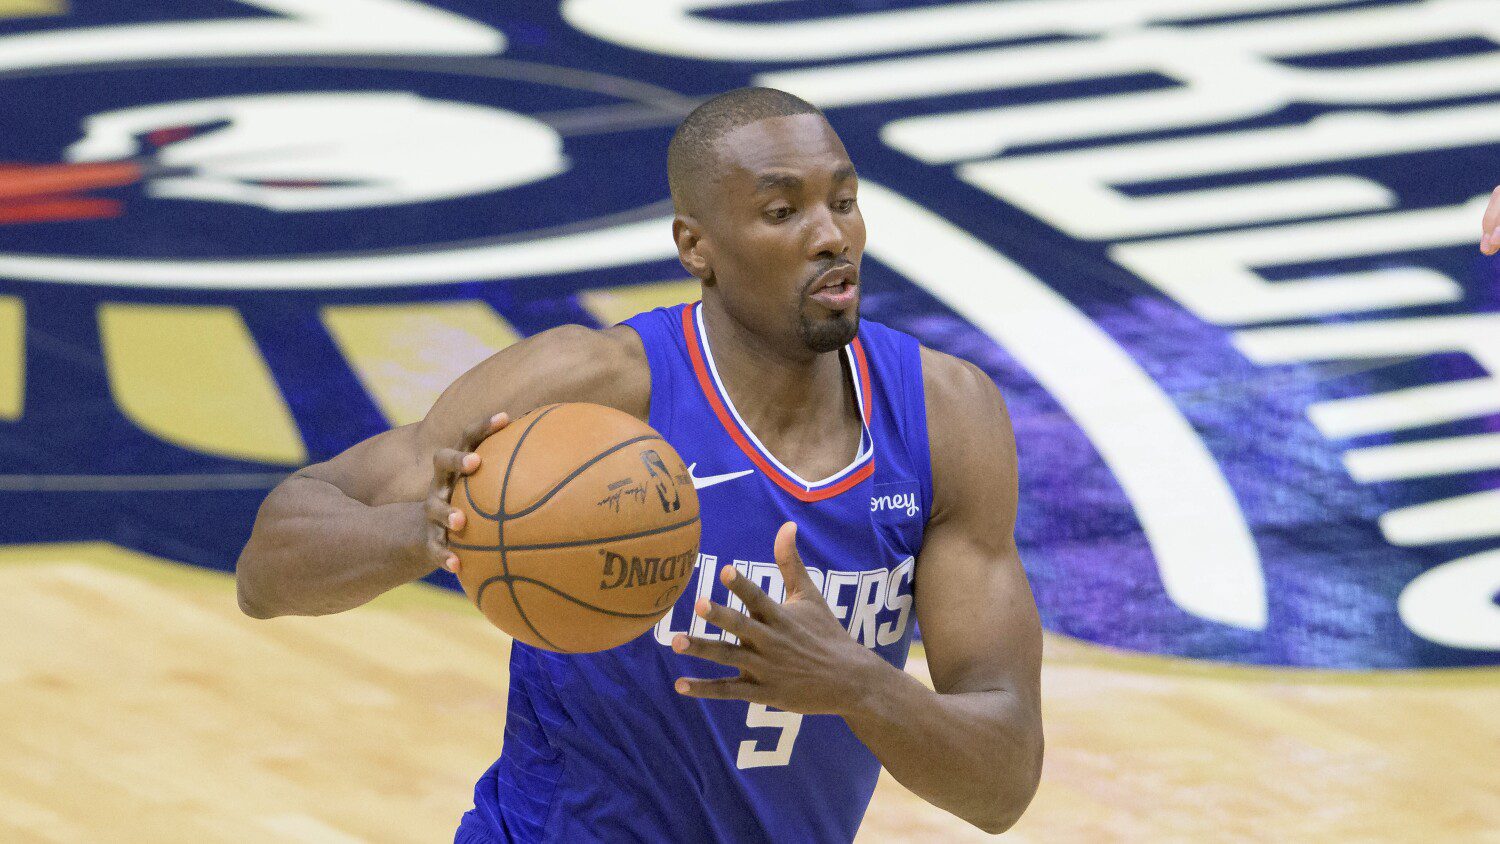 Serge Ibaka of the Clippers